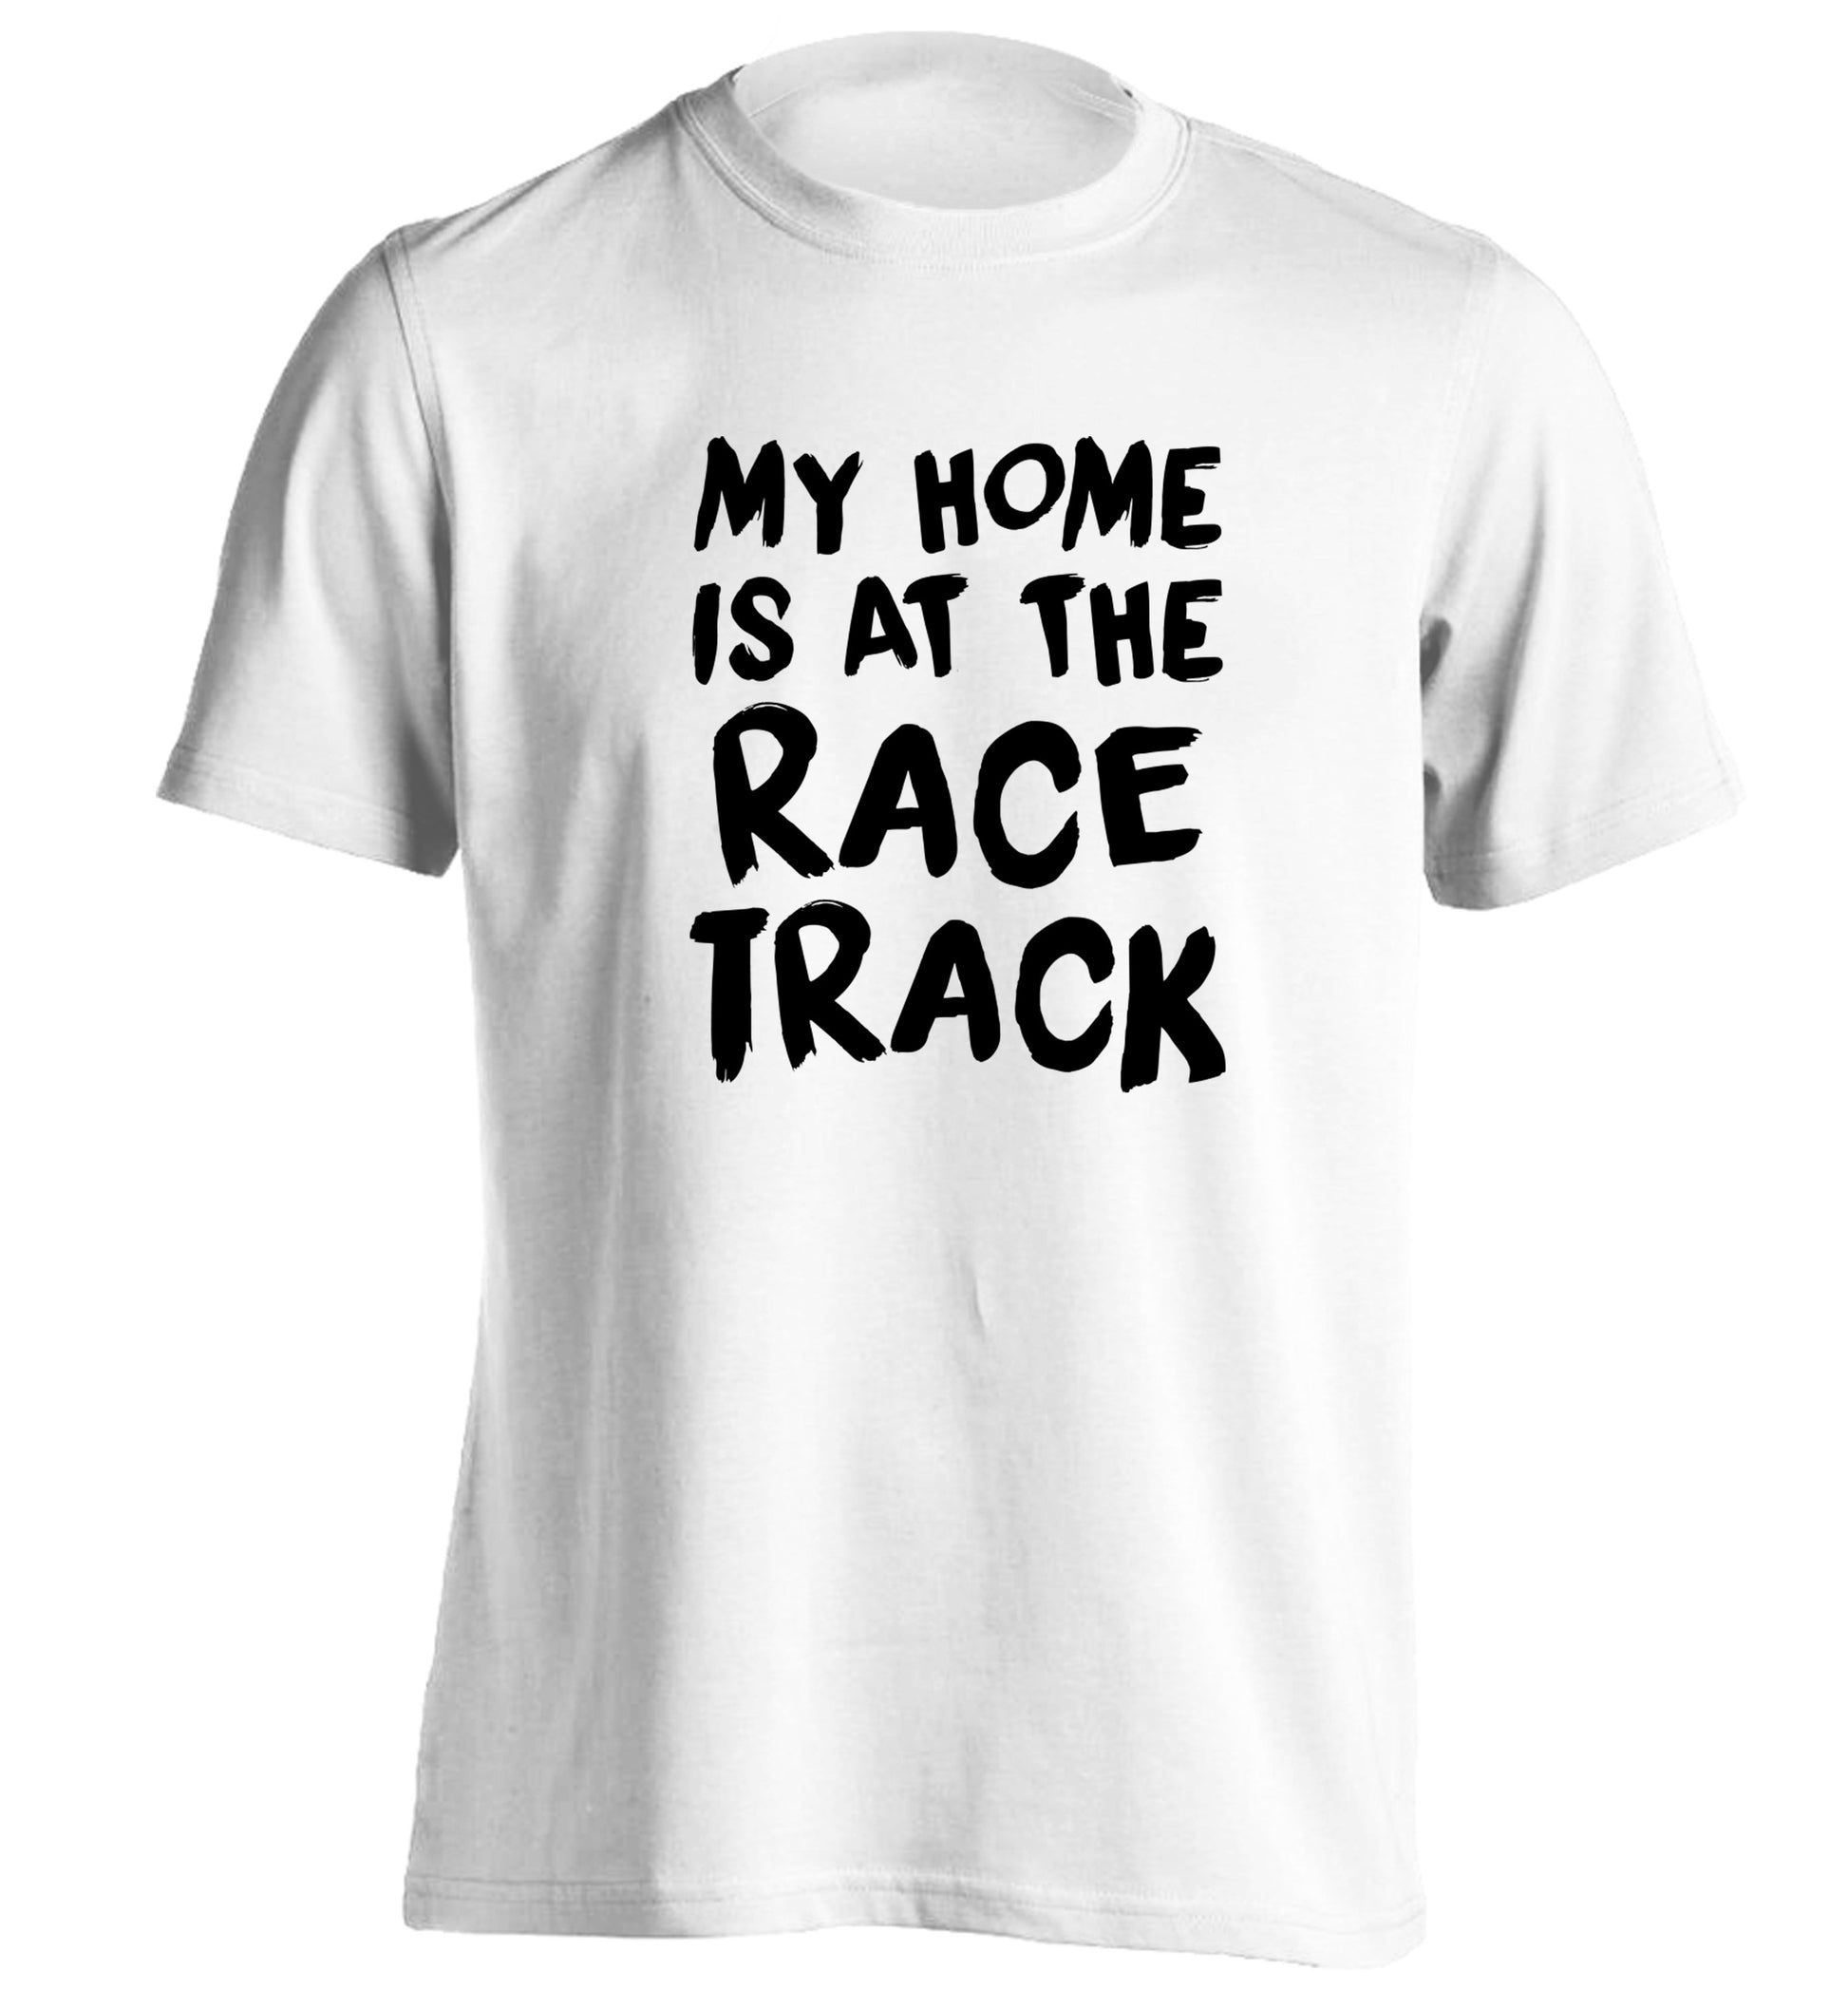 My home is at the race track adults unisex white Tshirt 2XL